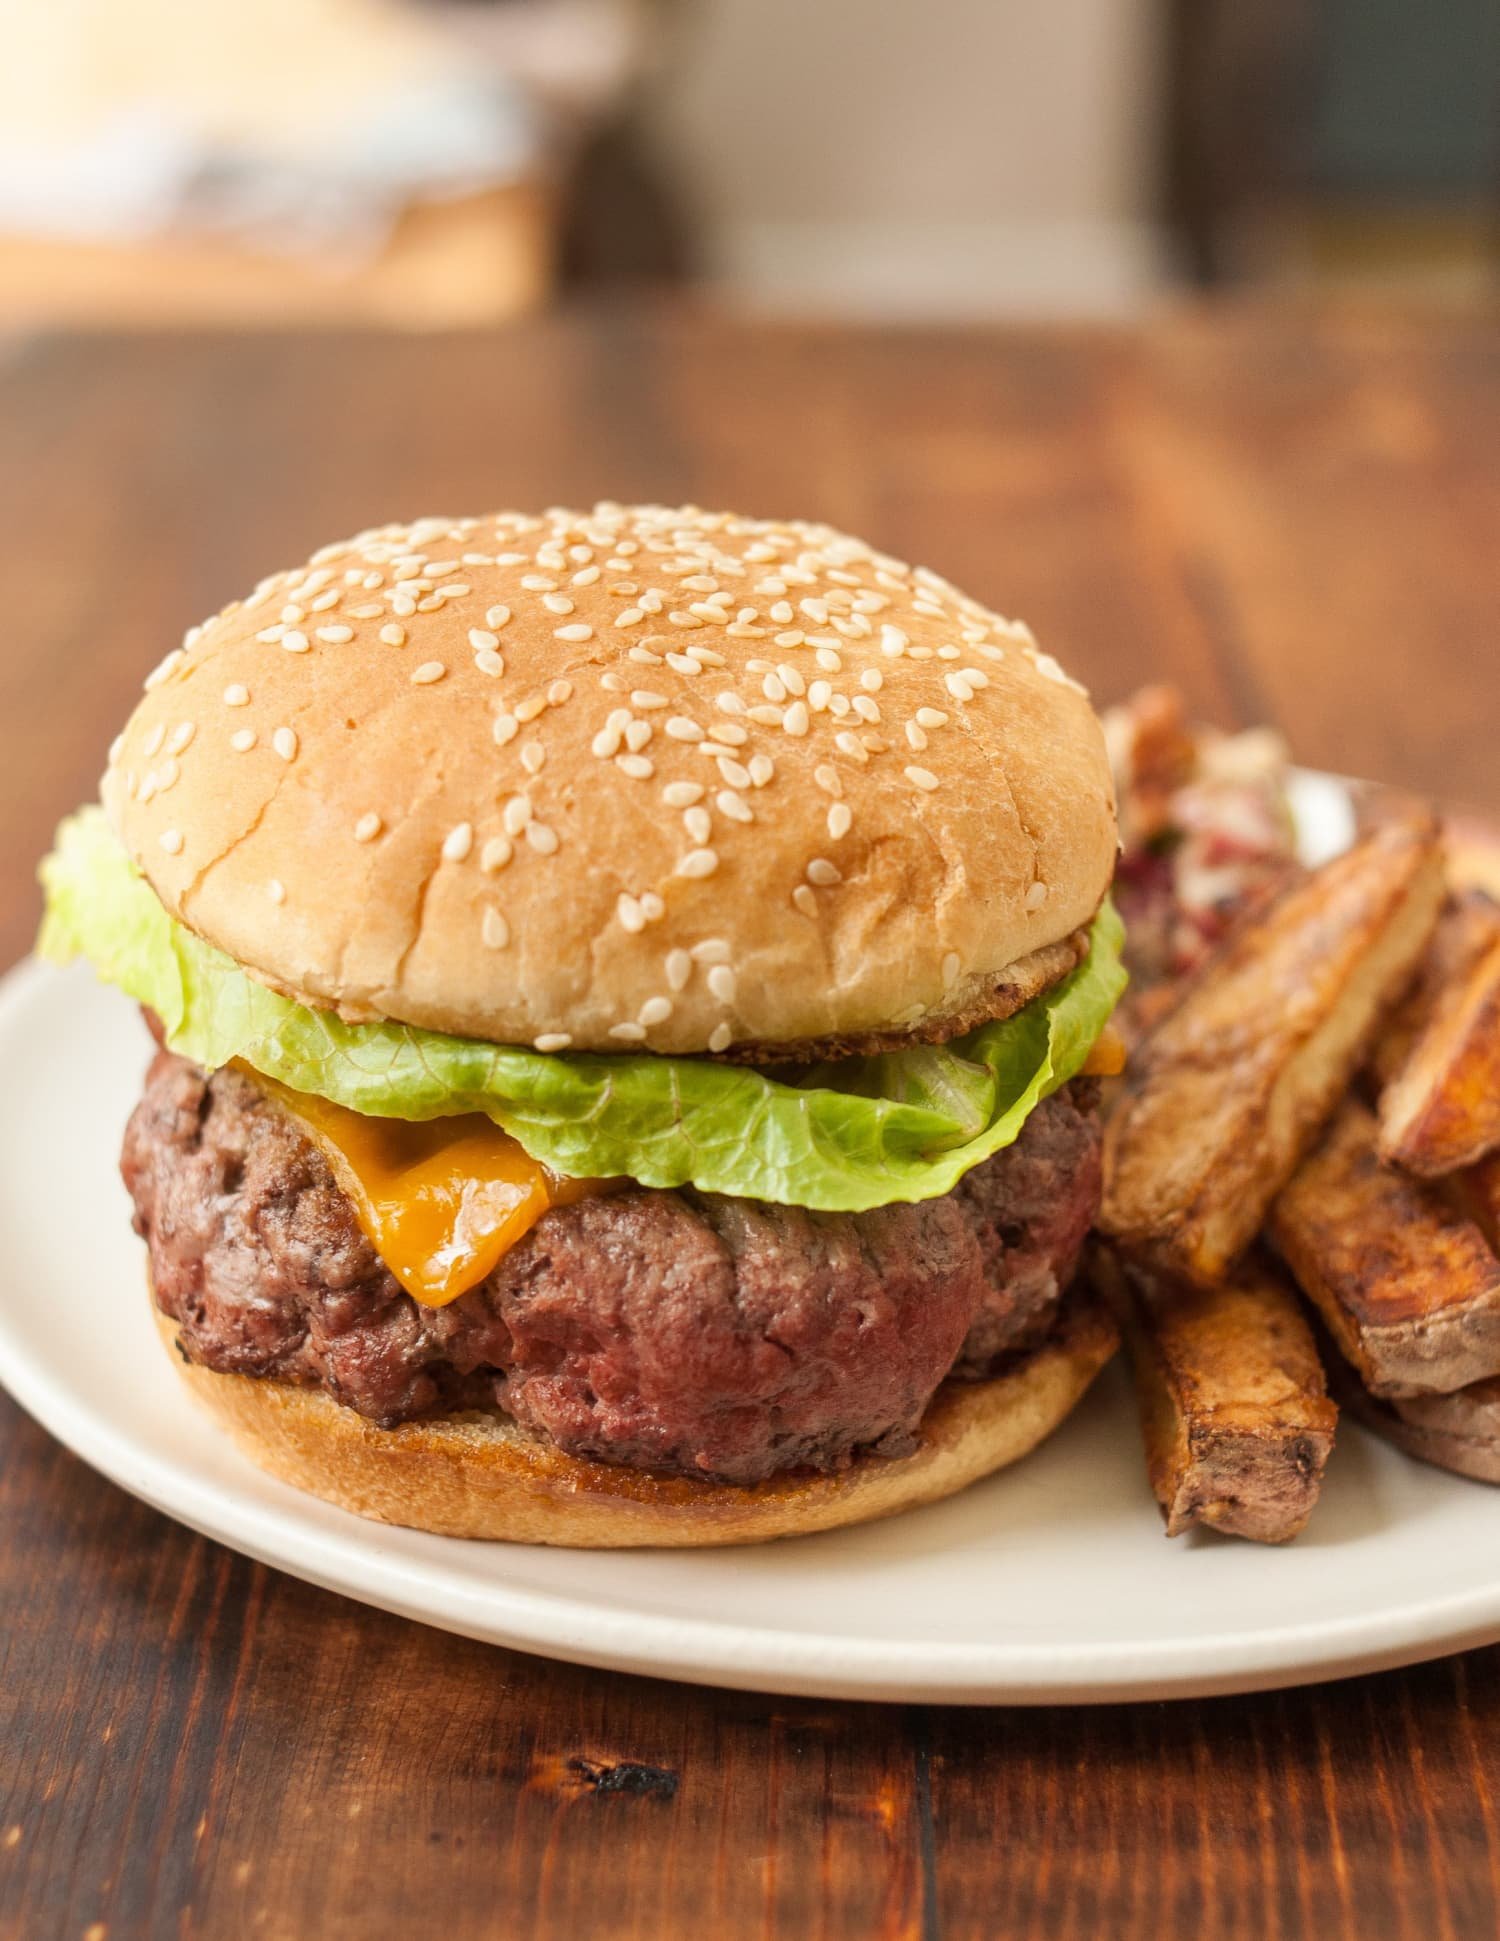 No Grill, No Problem: How To Make Burgers on the Stovetop